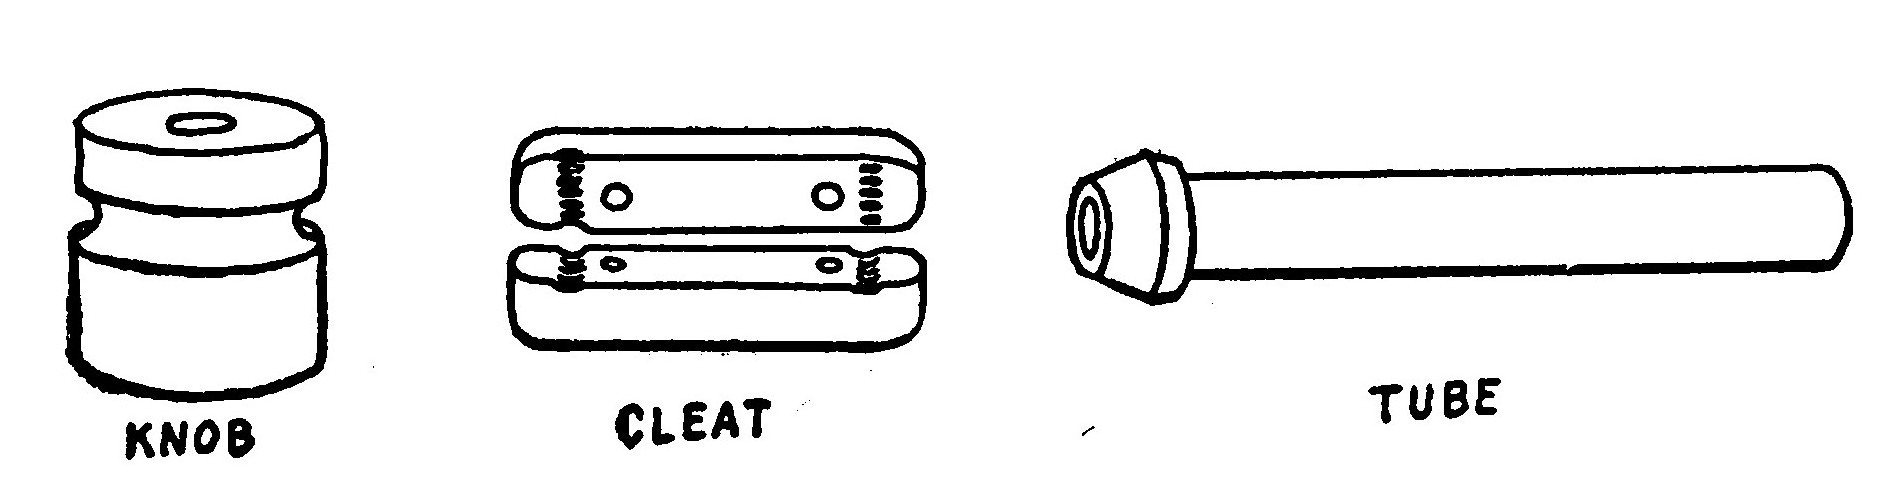 Fig. 90.—Porcelain Insulators to support Electric Light Wires.